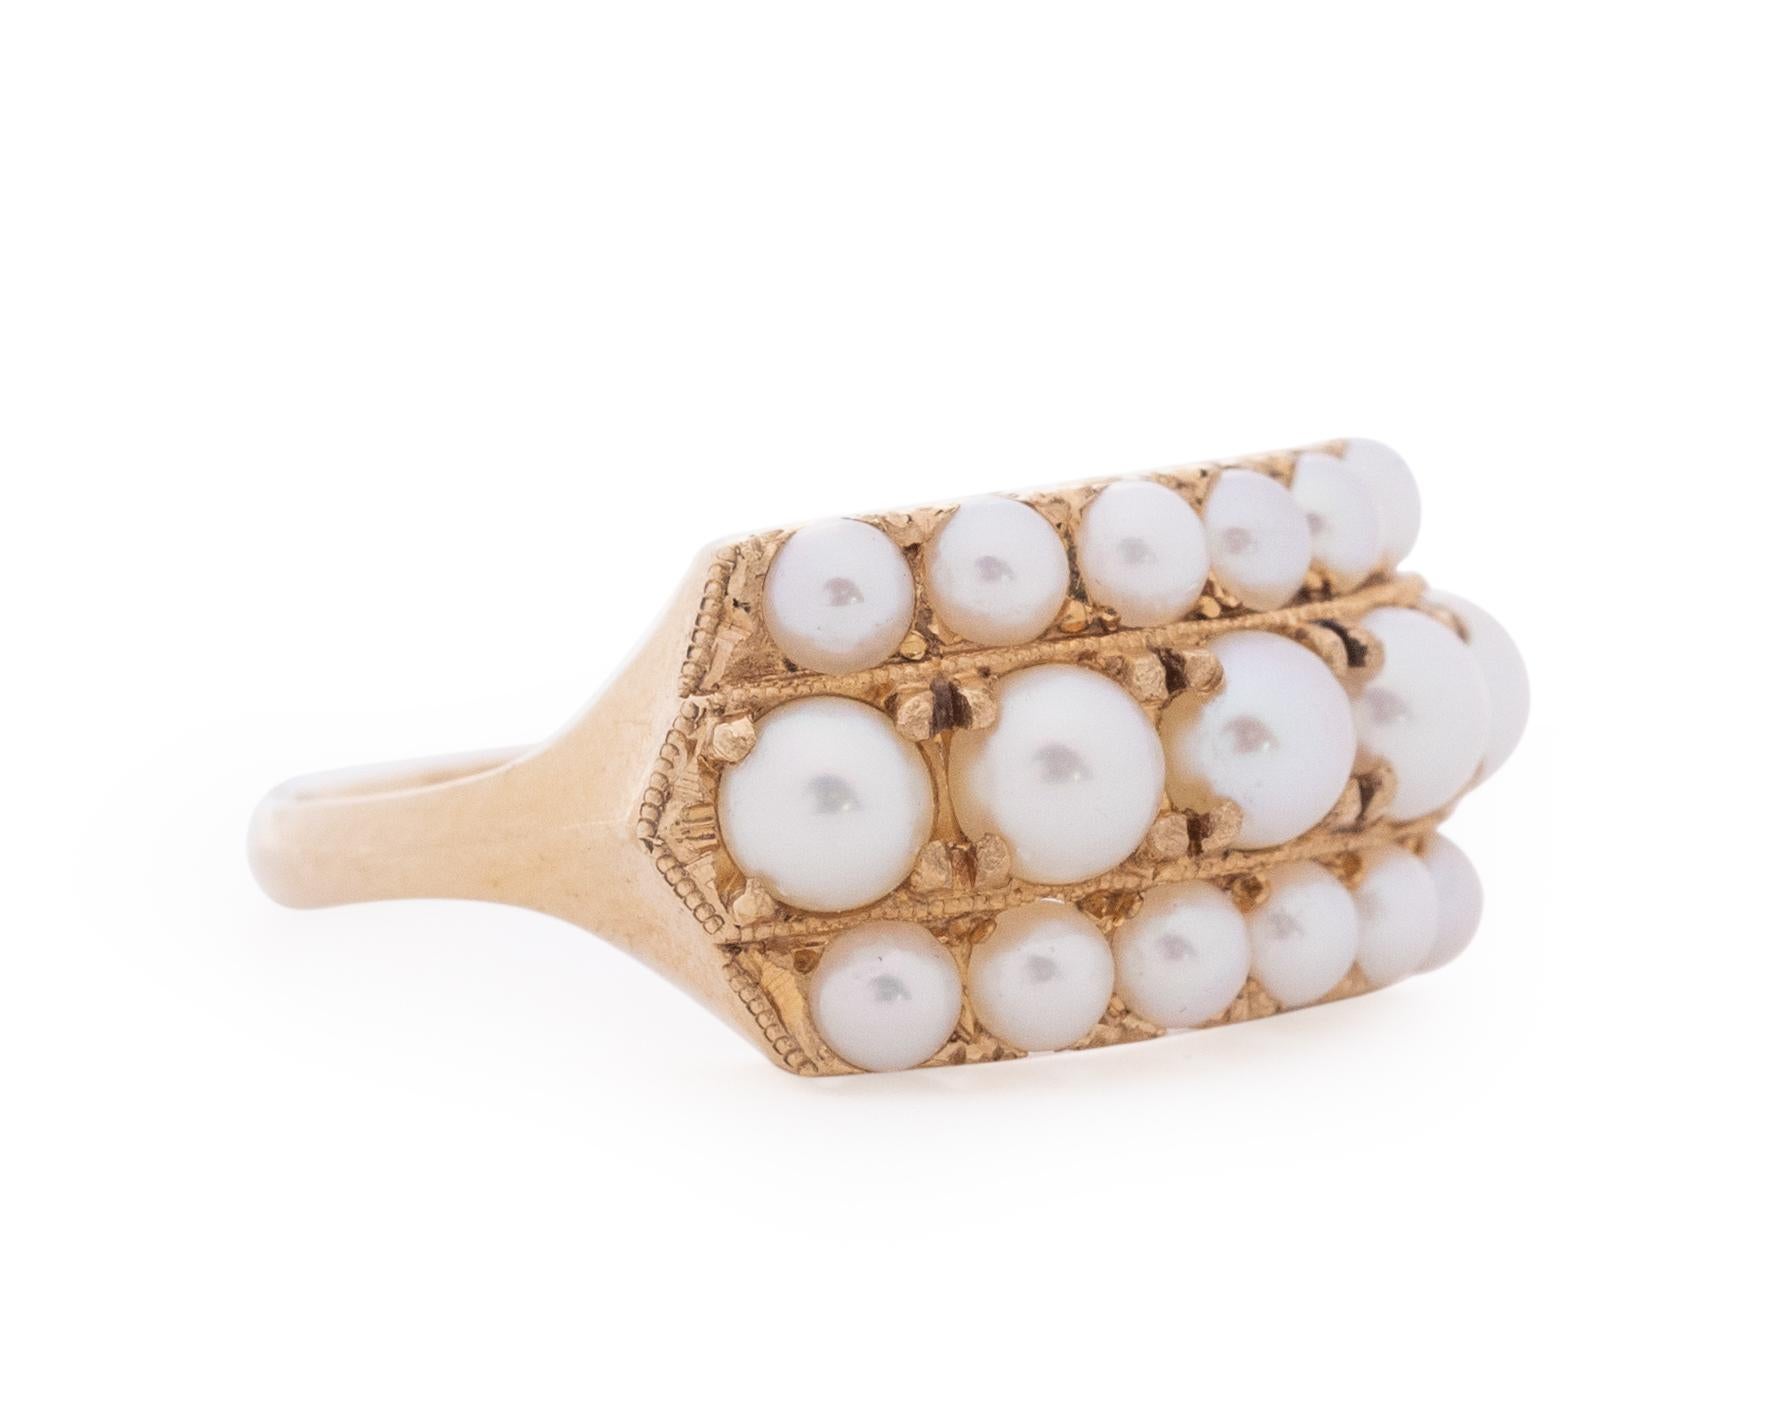 Item Details: 
Ring Size: 6
Metal Type: 14 Karat Yellow Gold [Hallmarked, and Tested]
Weight: 3.6 grams

Stones: Pearls, 1.00 Carat Total Weight, Pinkish Luster

Finger to Top of Stone Measurement: 5.5mm
Condition: Excellent